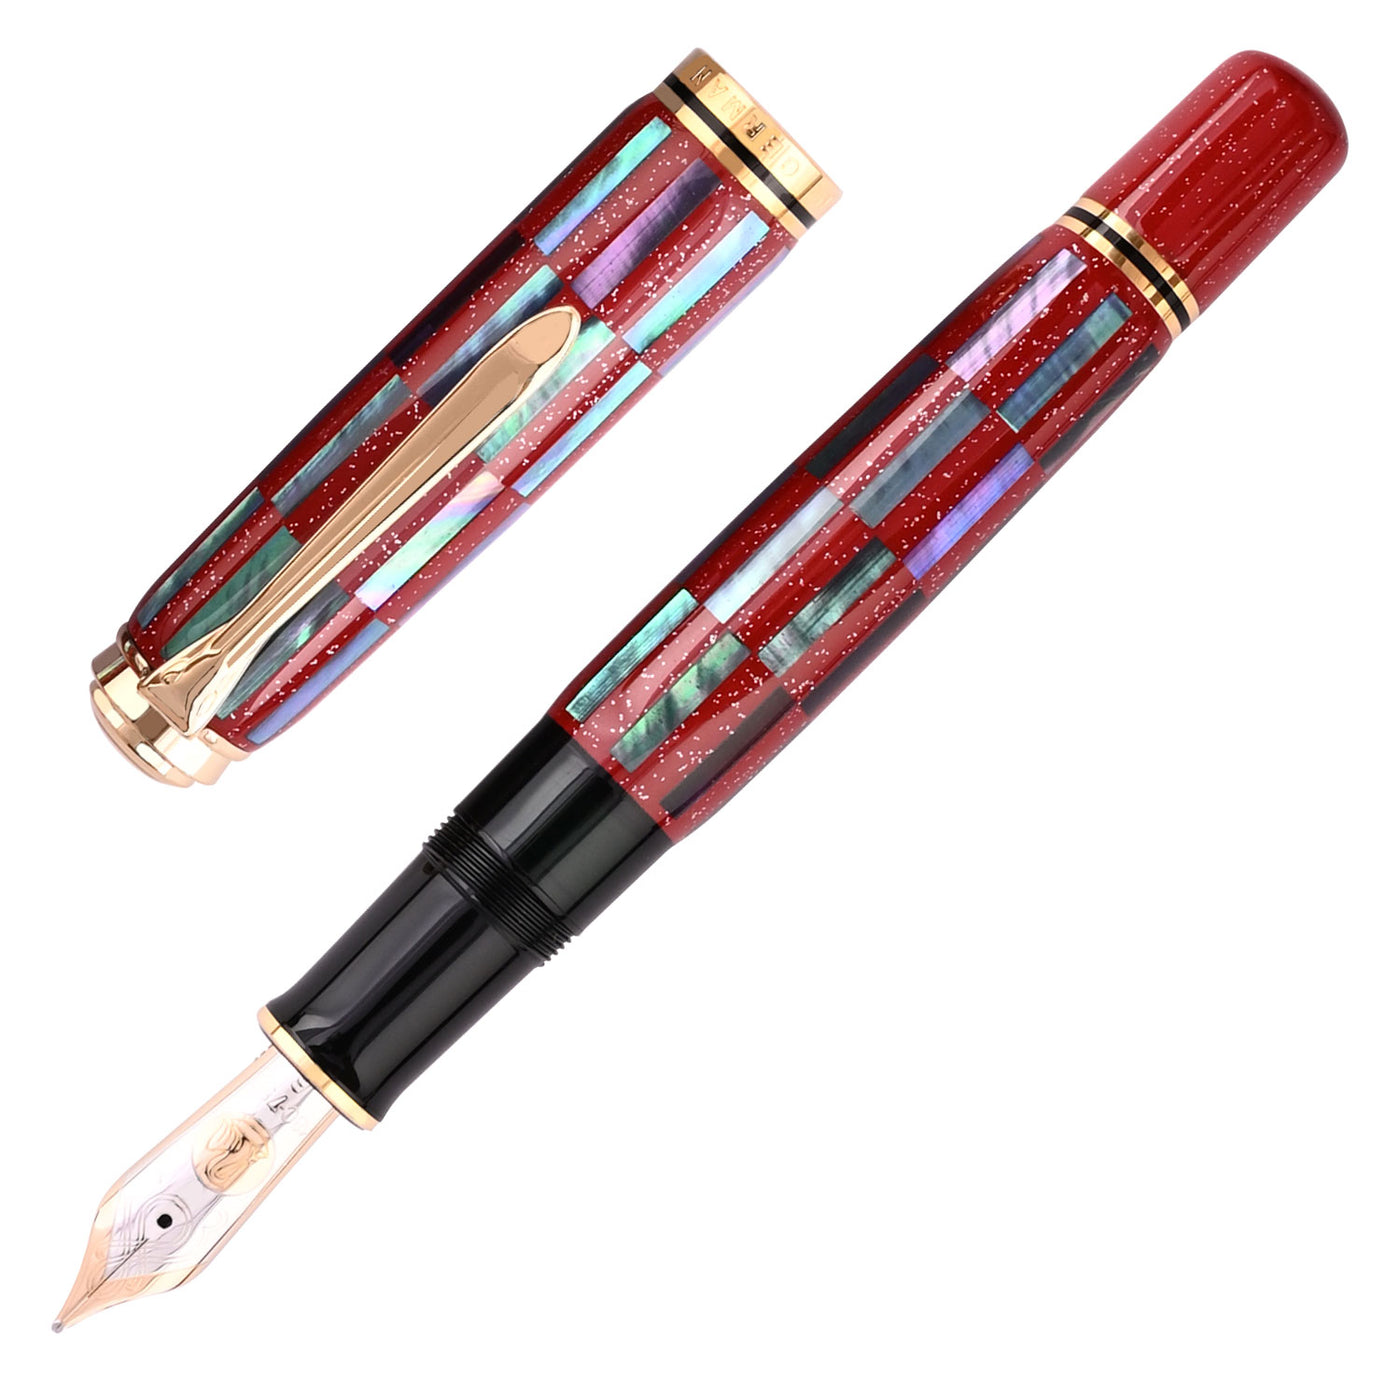 Pelikan M1000 Fountain Pen - Raden Red Infinity (Limited Edition) 1